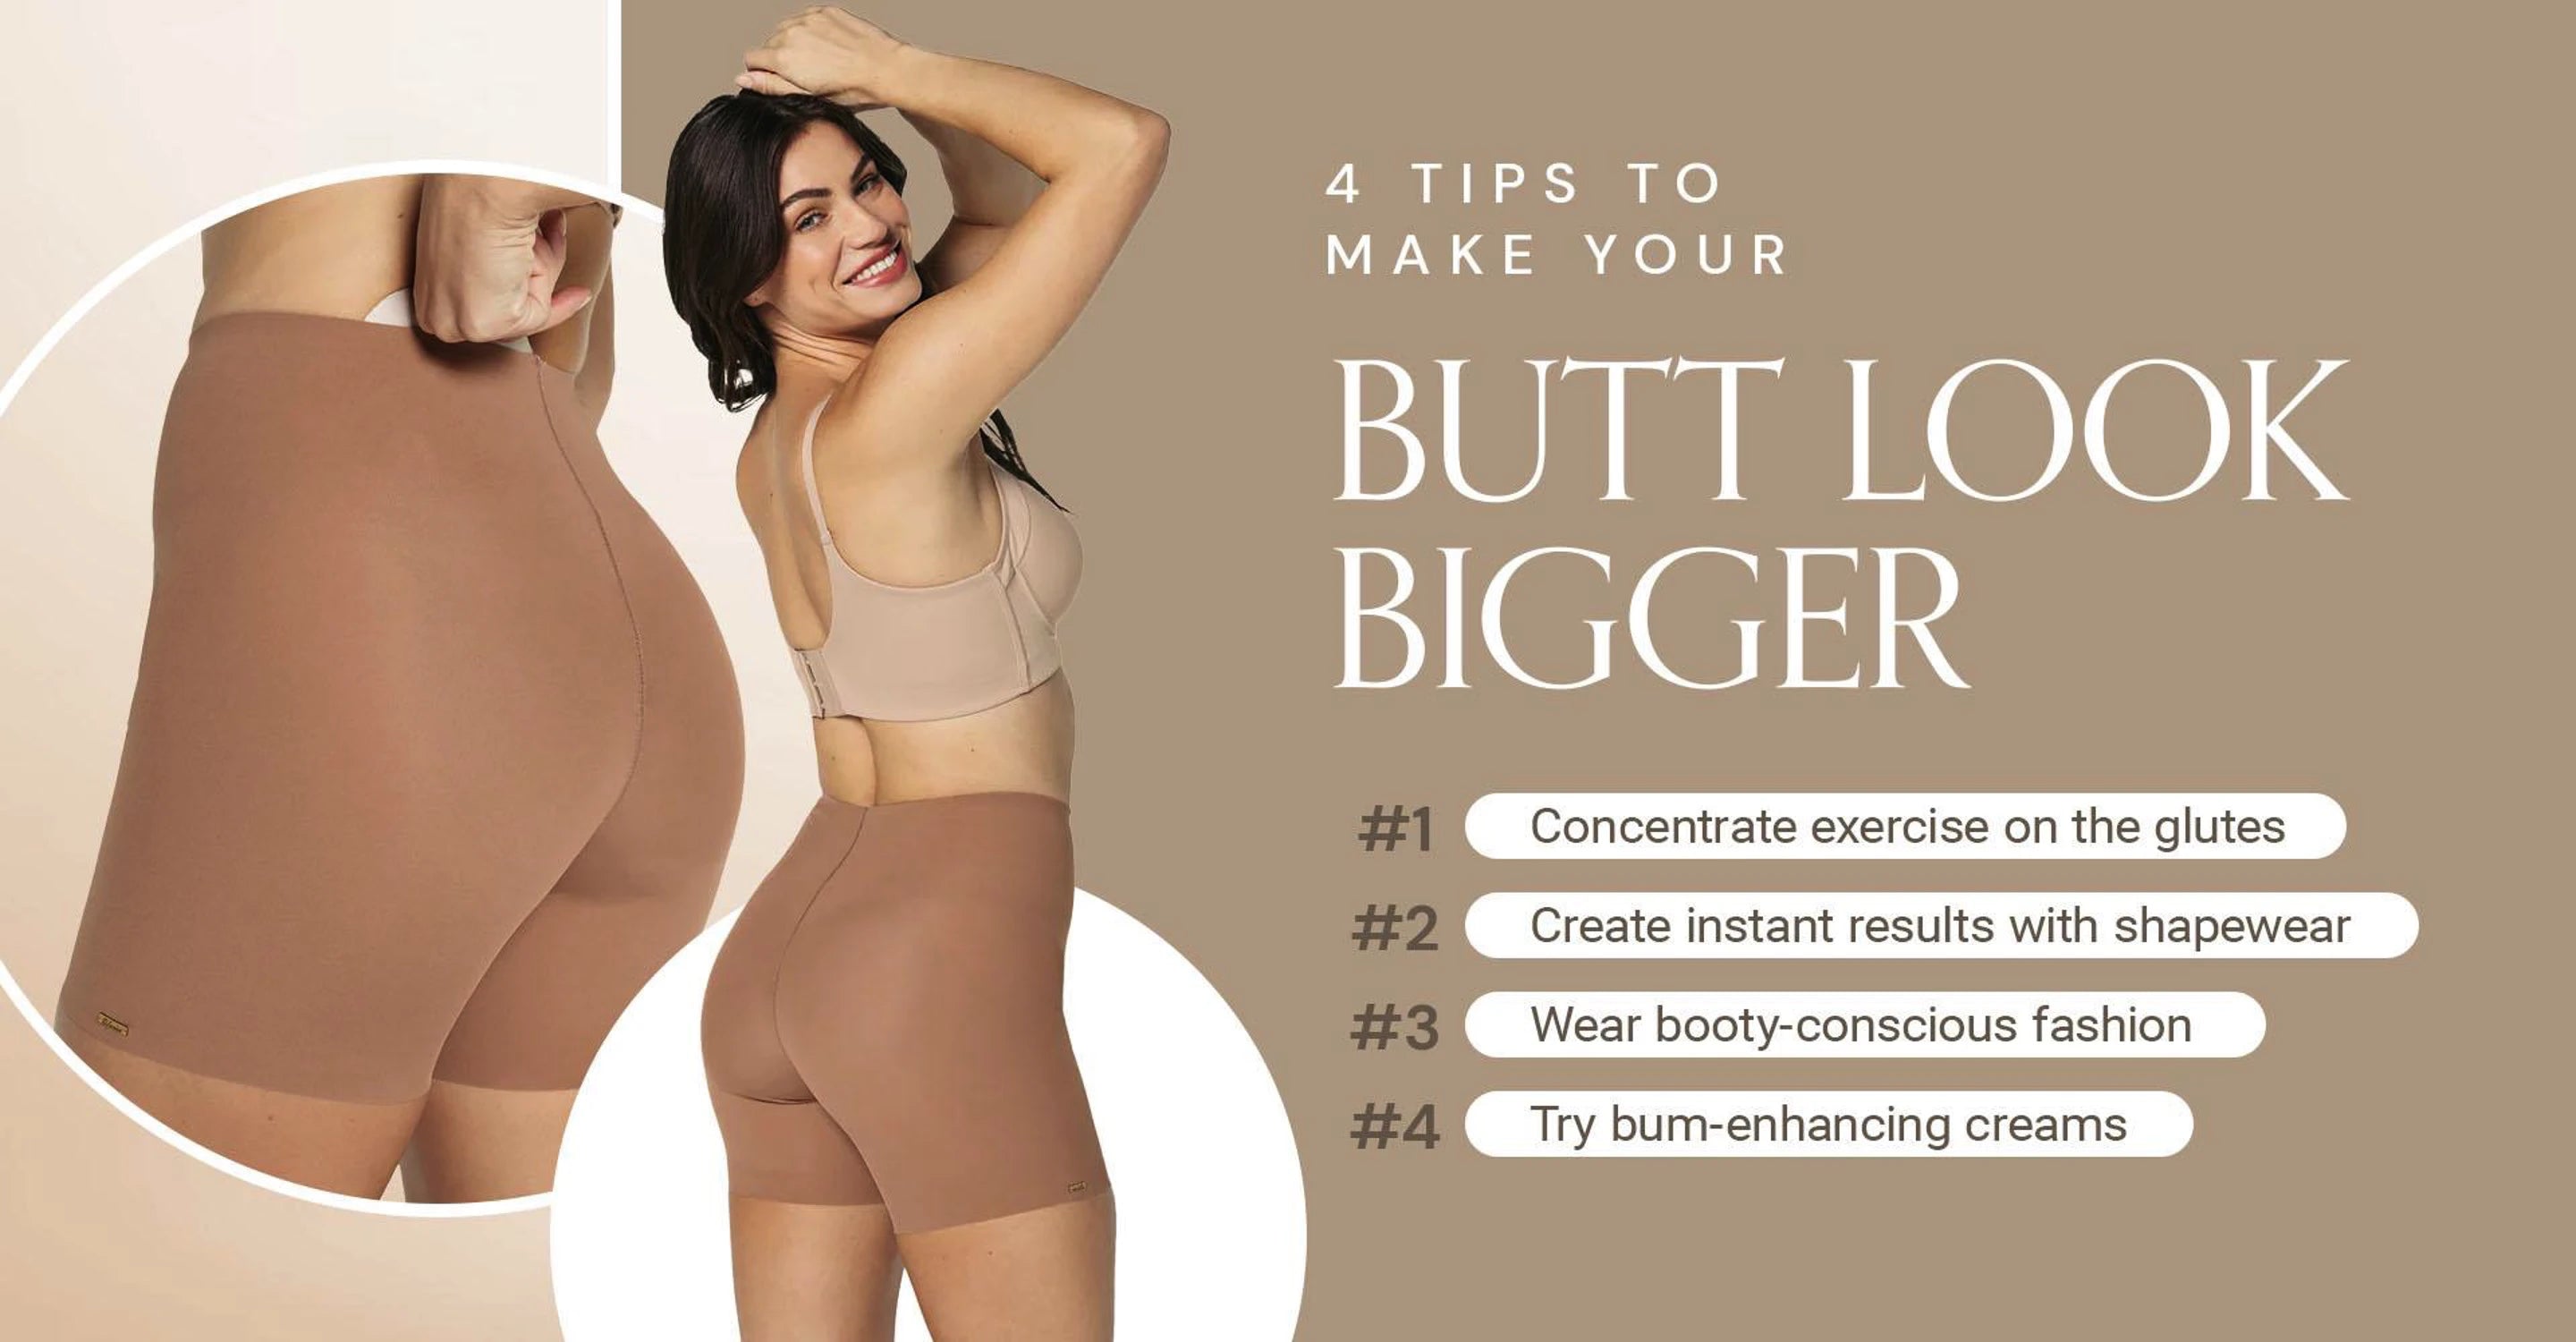 How To Make Your Butt Look Bigger: 4 Tips